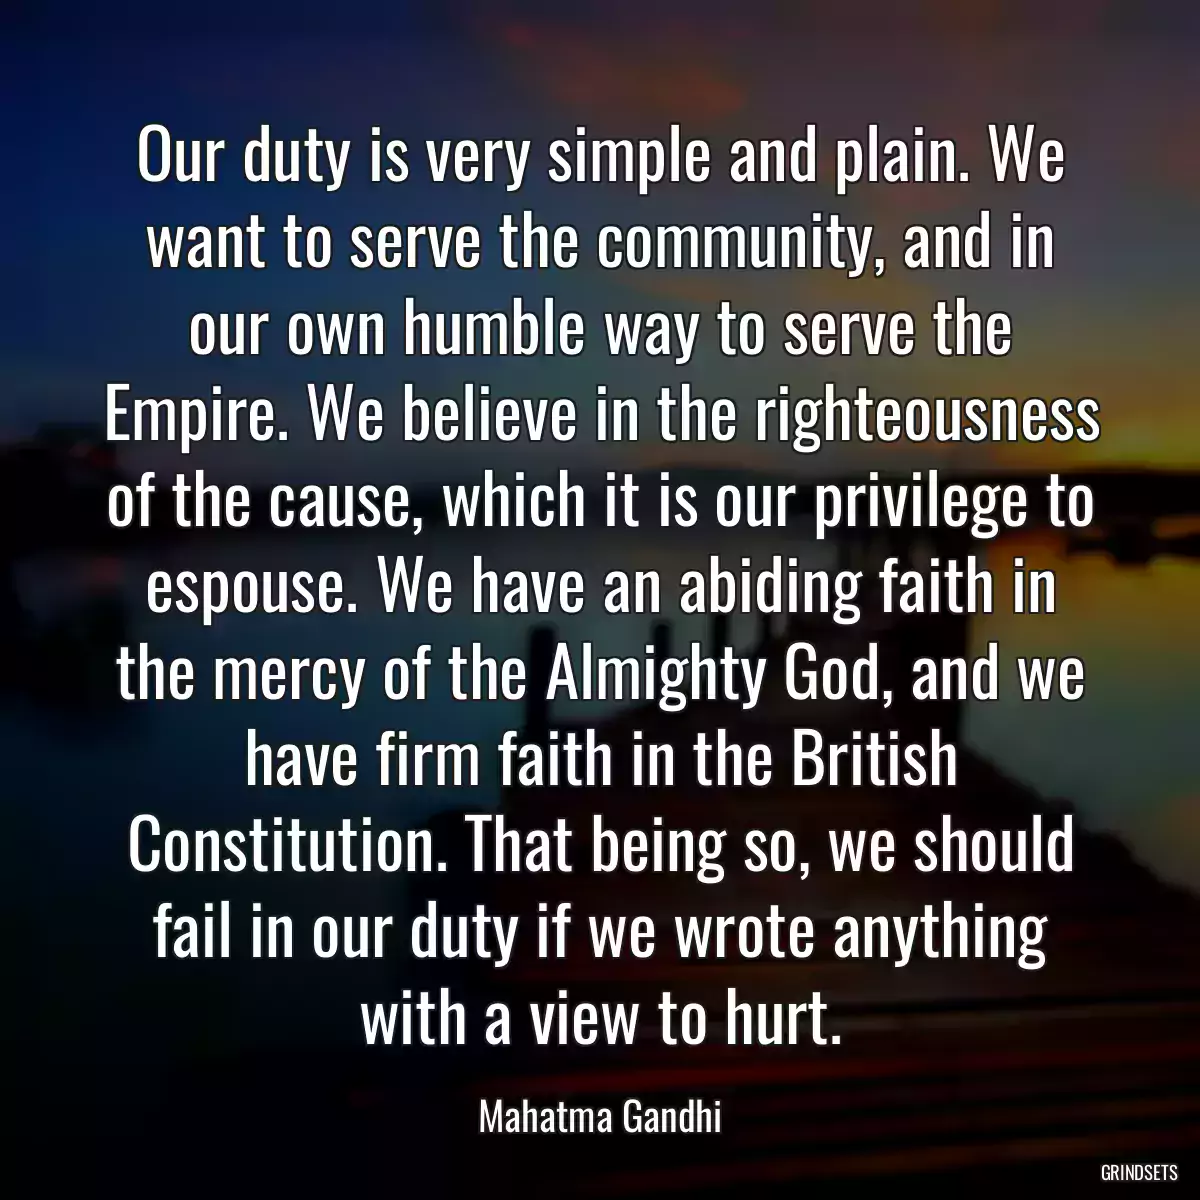 Our duty is very simple and plain. We want to serve the community, and in our own humble way to serve the Empire. We believe in the righteousness of the cause, which it is our privilege to espouse. We have an abiding faith in the mercy of the Almighty God, and we have firm faith in the British Constitution. That being so, we should fail in our duty if we wrote anything with a view to hurt.